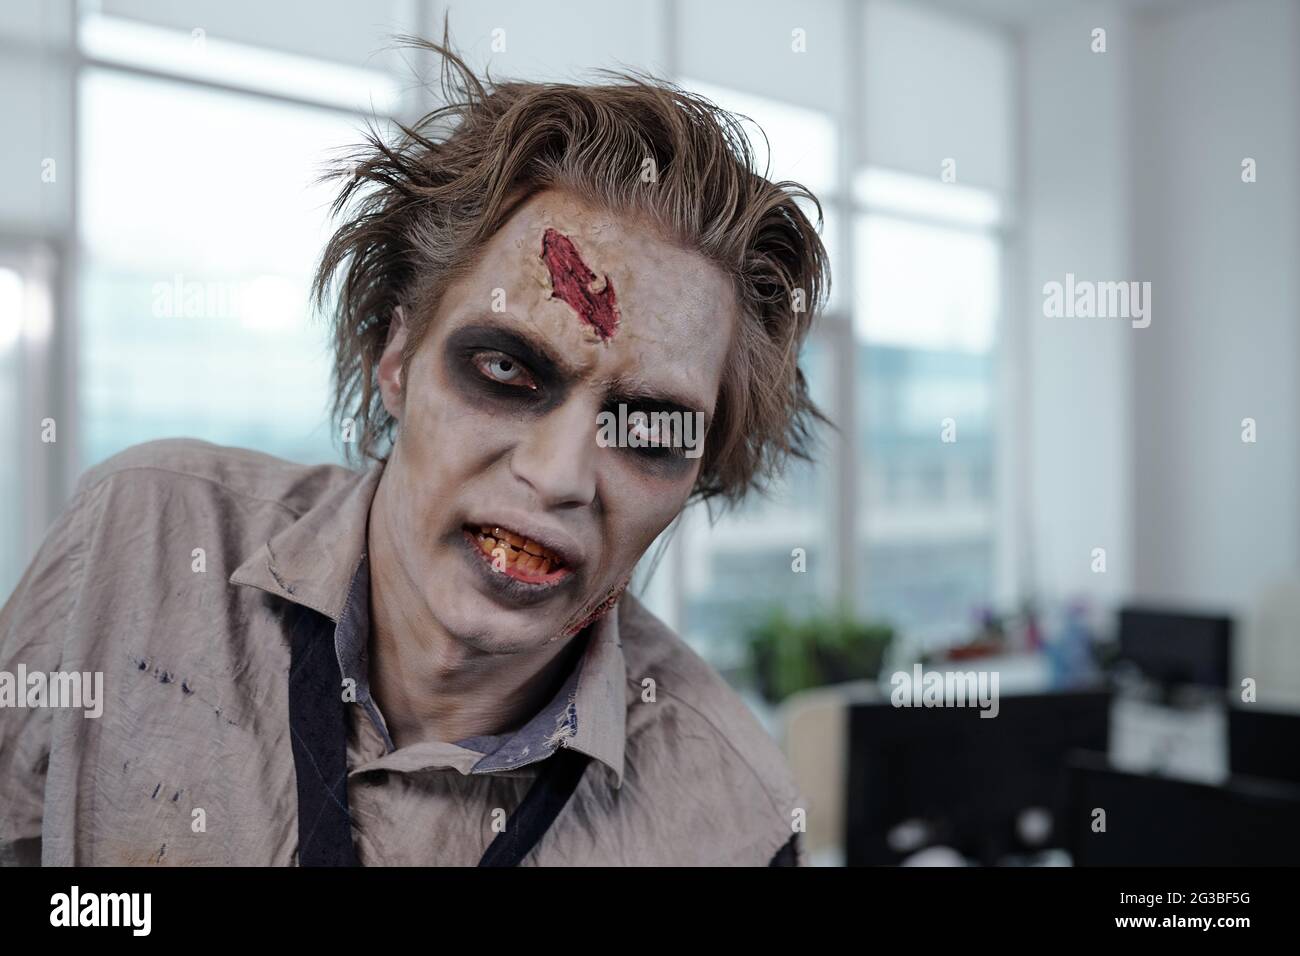 Young gloomy man with zombie stage makeup looking at camera in office Stock Photo